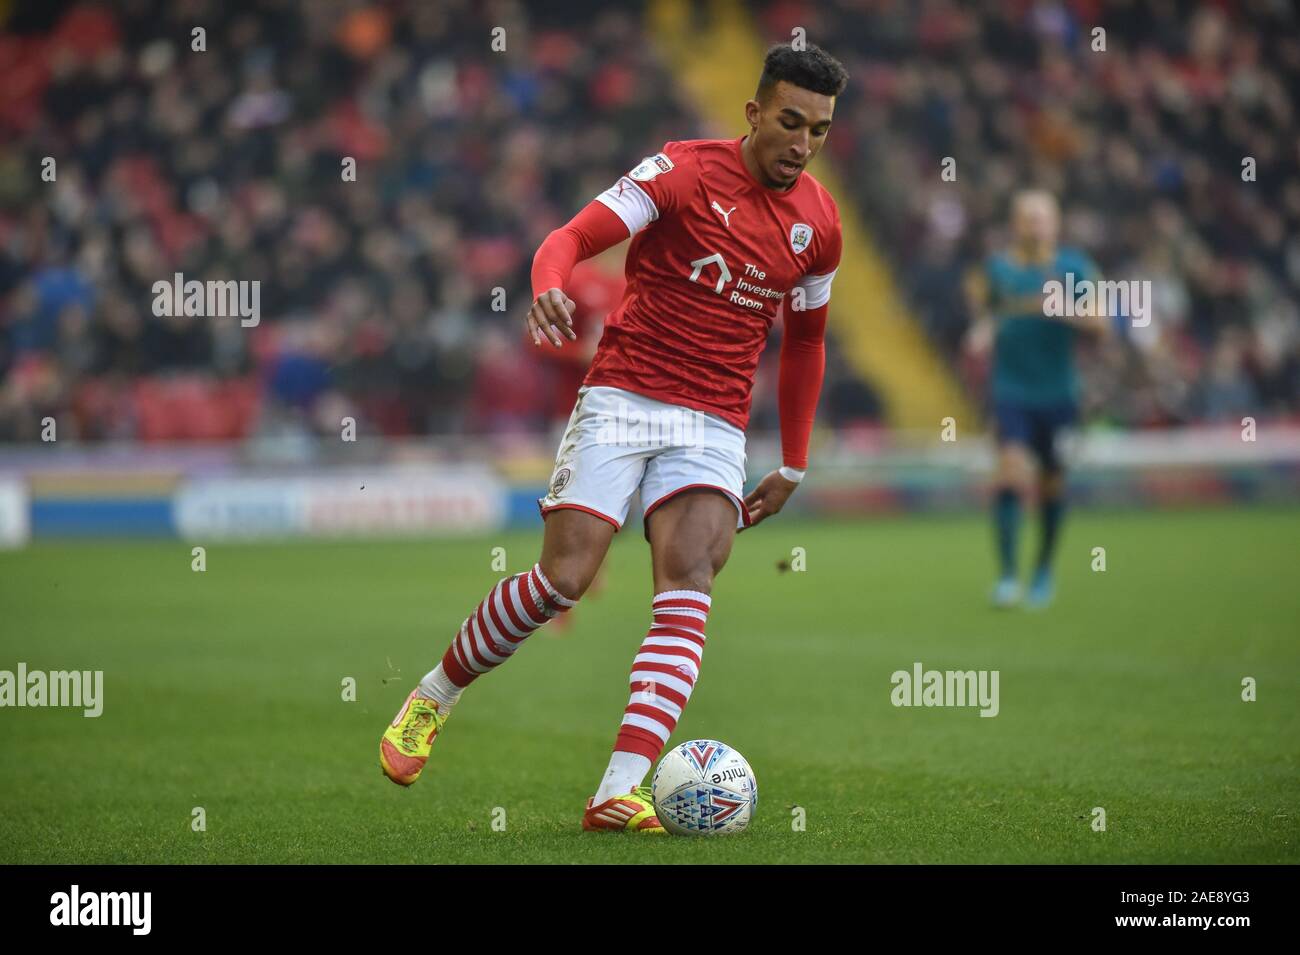 30th November 2019, Oakwell, Barnsley, England; Sky Bet Championship, Barnsley v Hull City :Jacob Brown (7) of Barnsley FC runs down the wing in the Yorkshire derby match. Credit: Dean Williams/News Images Stock Photo